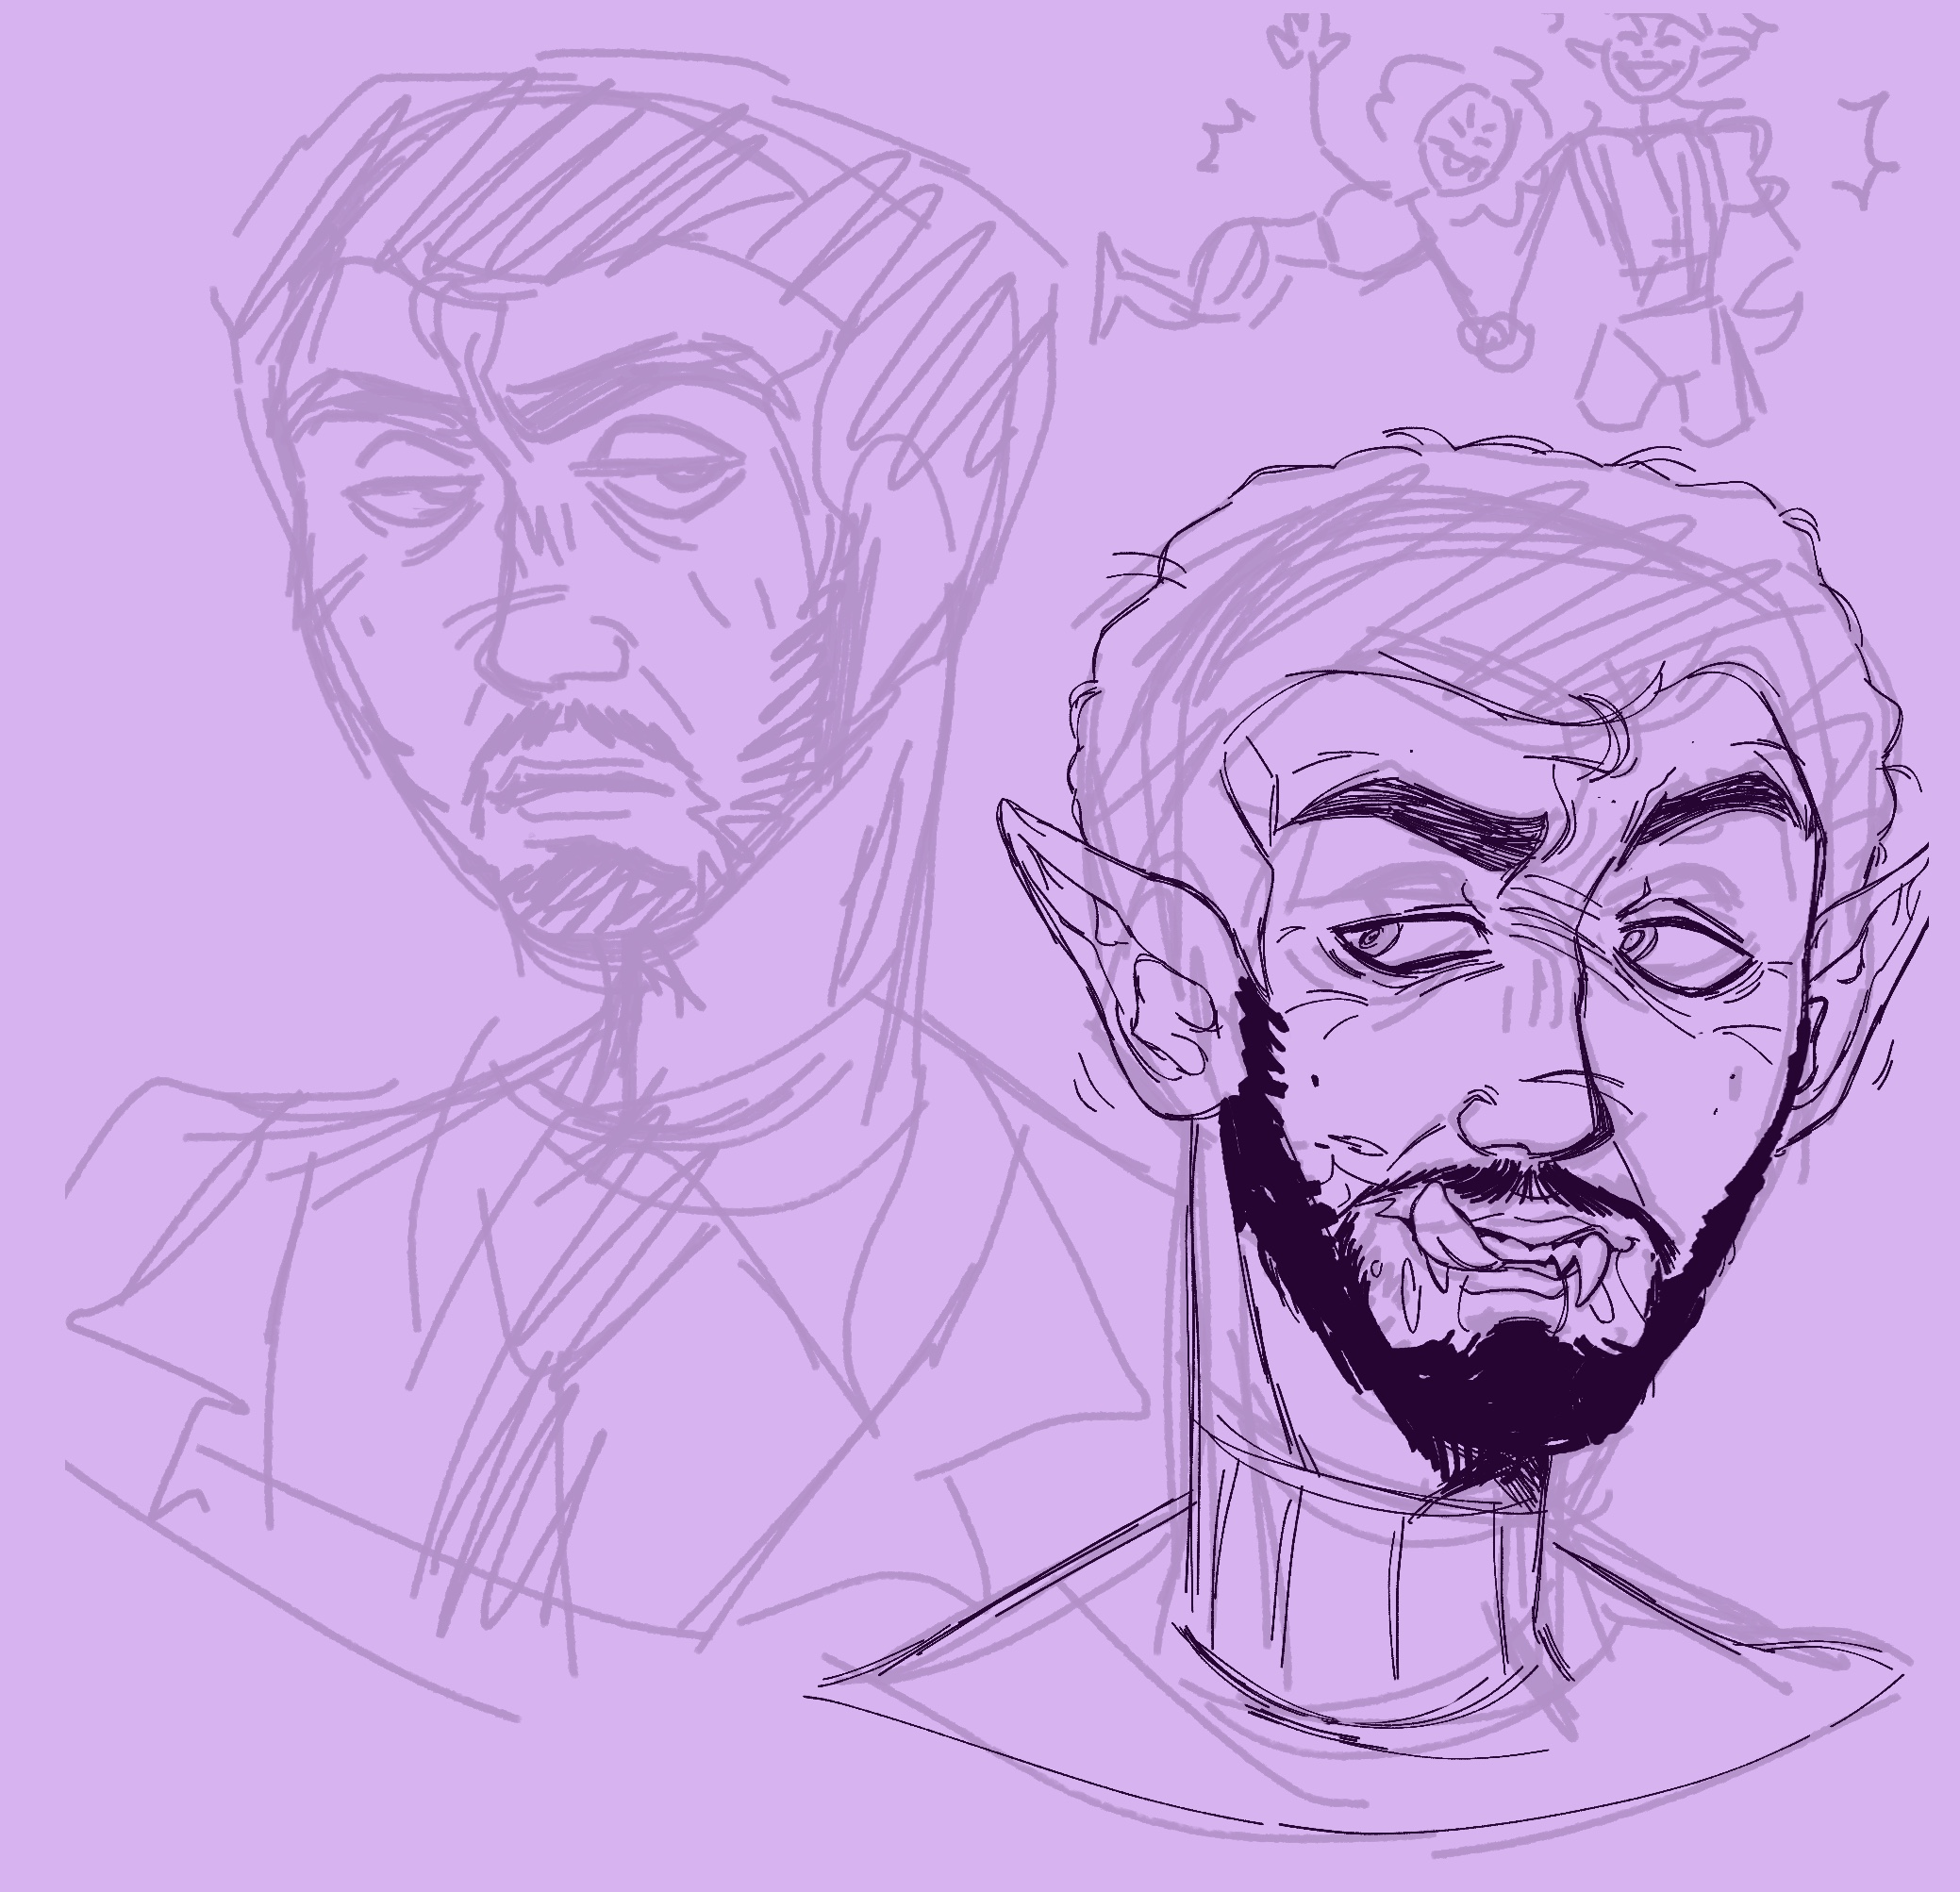 Vamp Martin GreyWhinder doodles (Harmony and Horror)